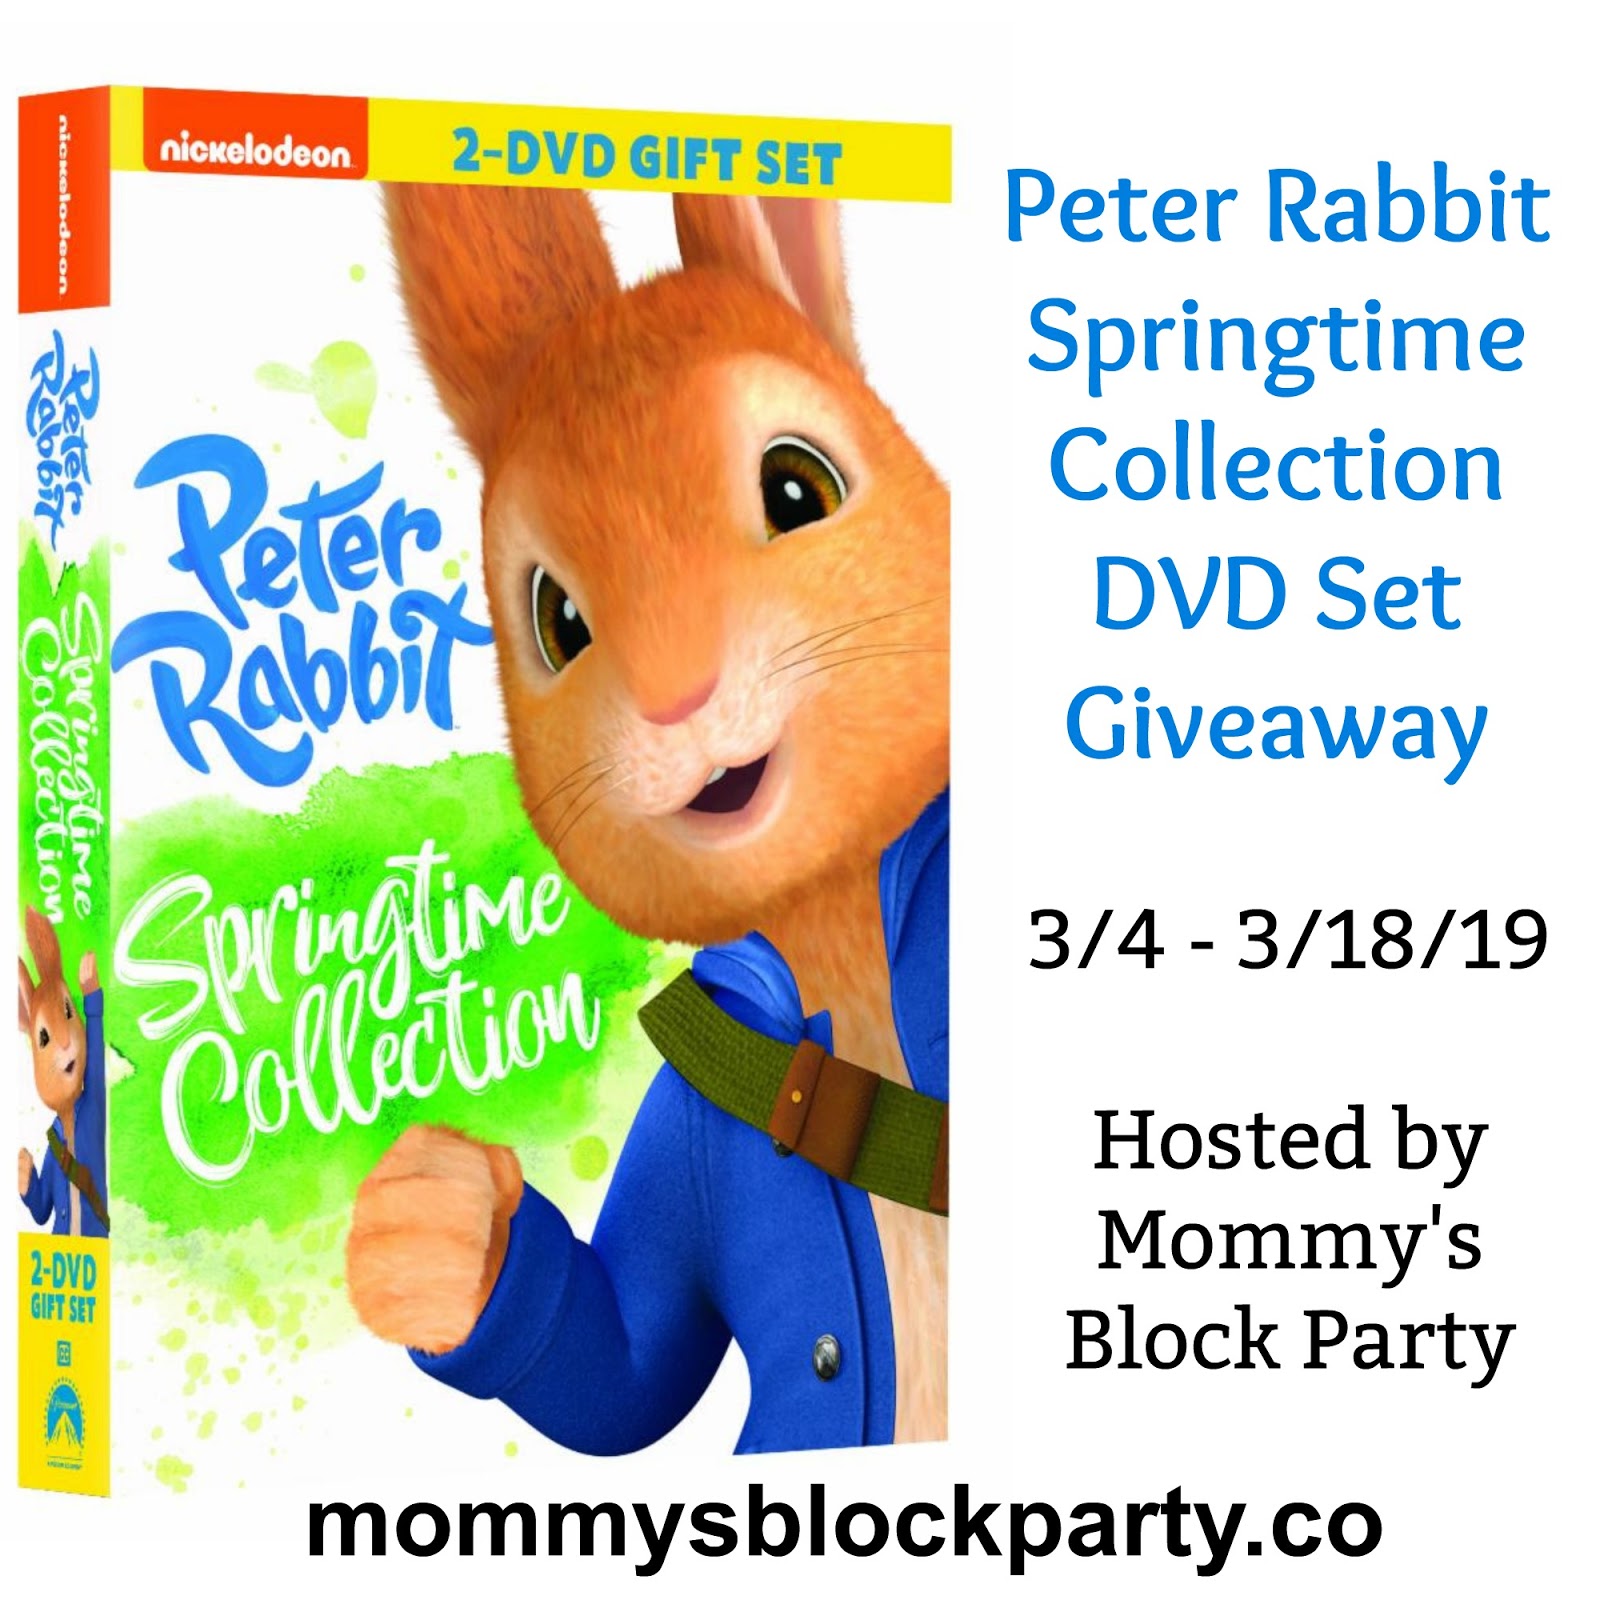 Peter Rabbit Springtime Collection 2-Pack Now on DVD + #Giveaway